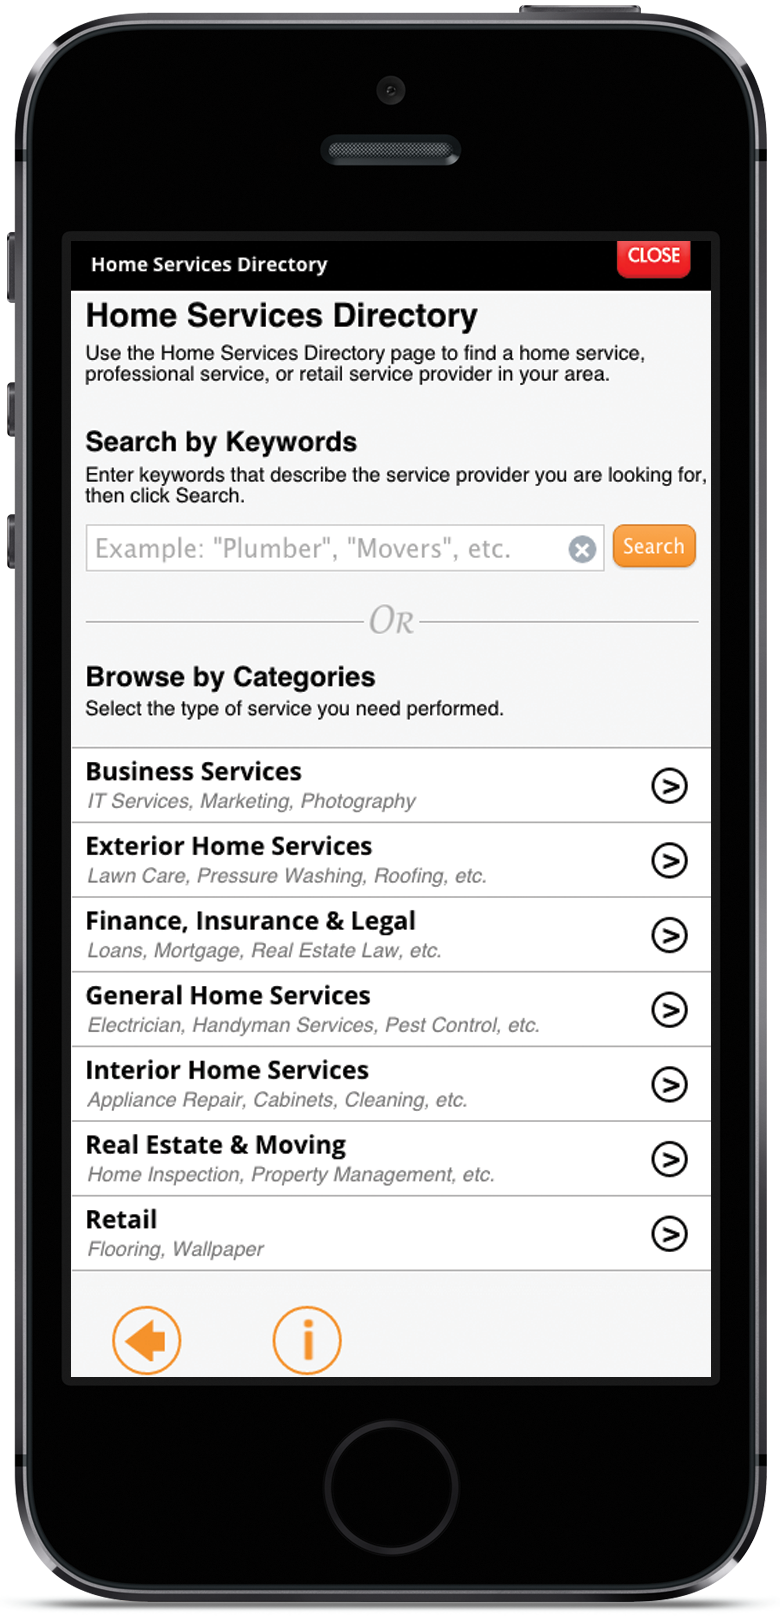 Users can use keywords or categories to search for providers they need. Every provider gets their own Electronic Business Card, so customers can contact them from the search results with a single tap.